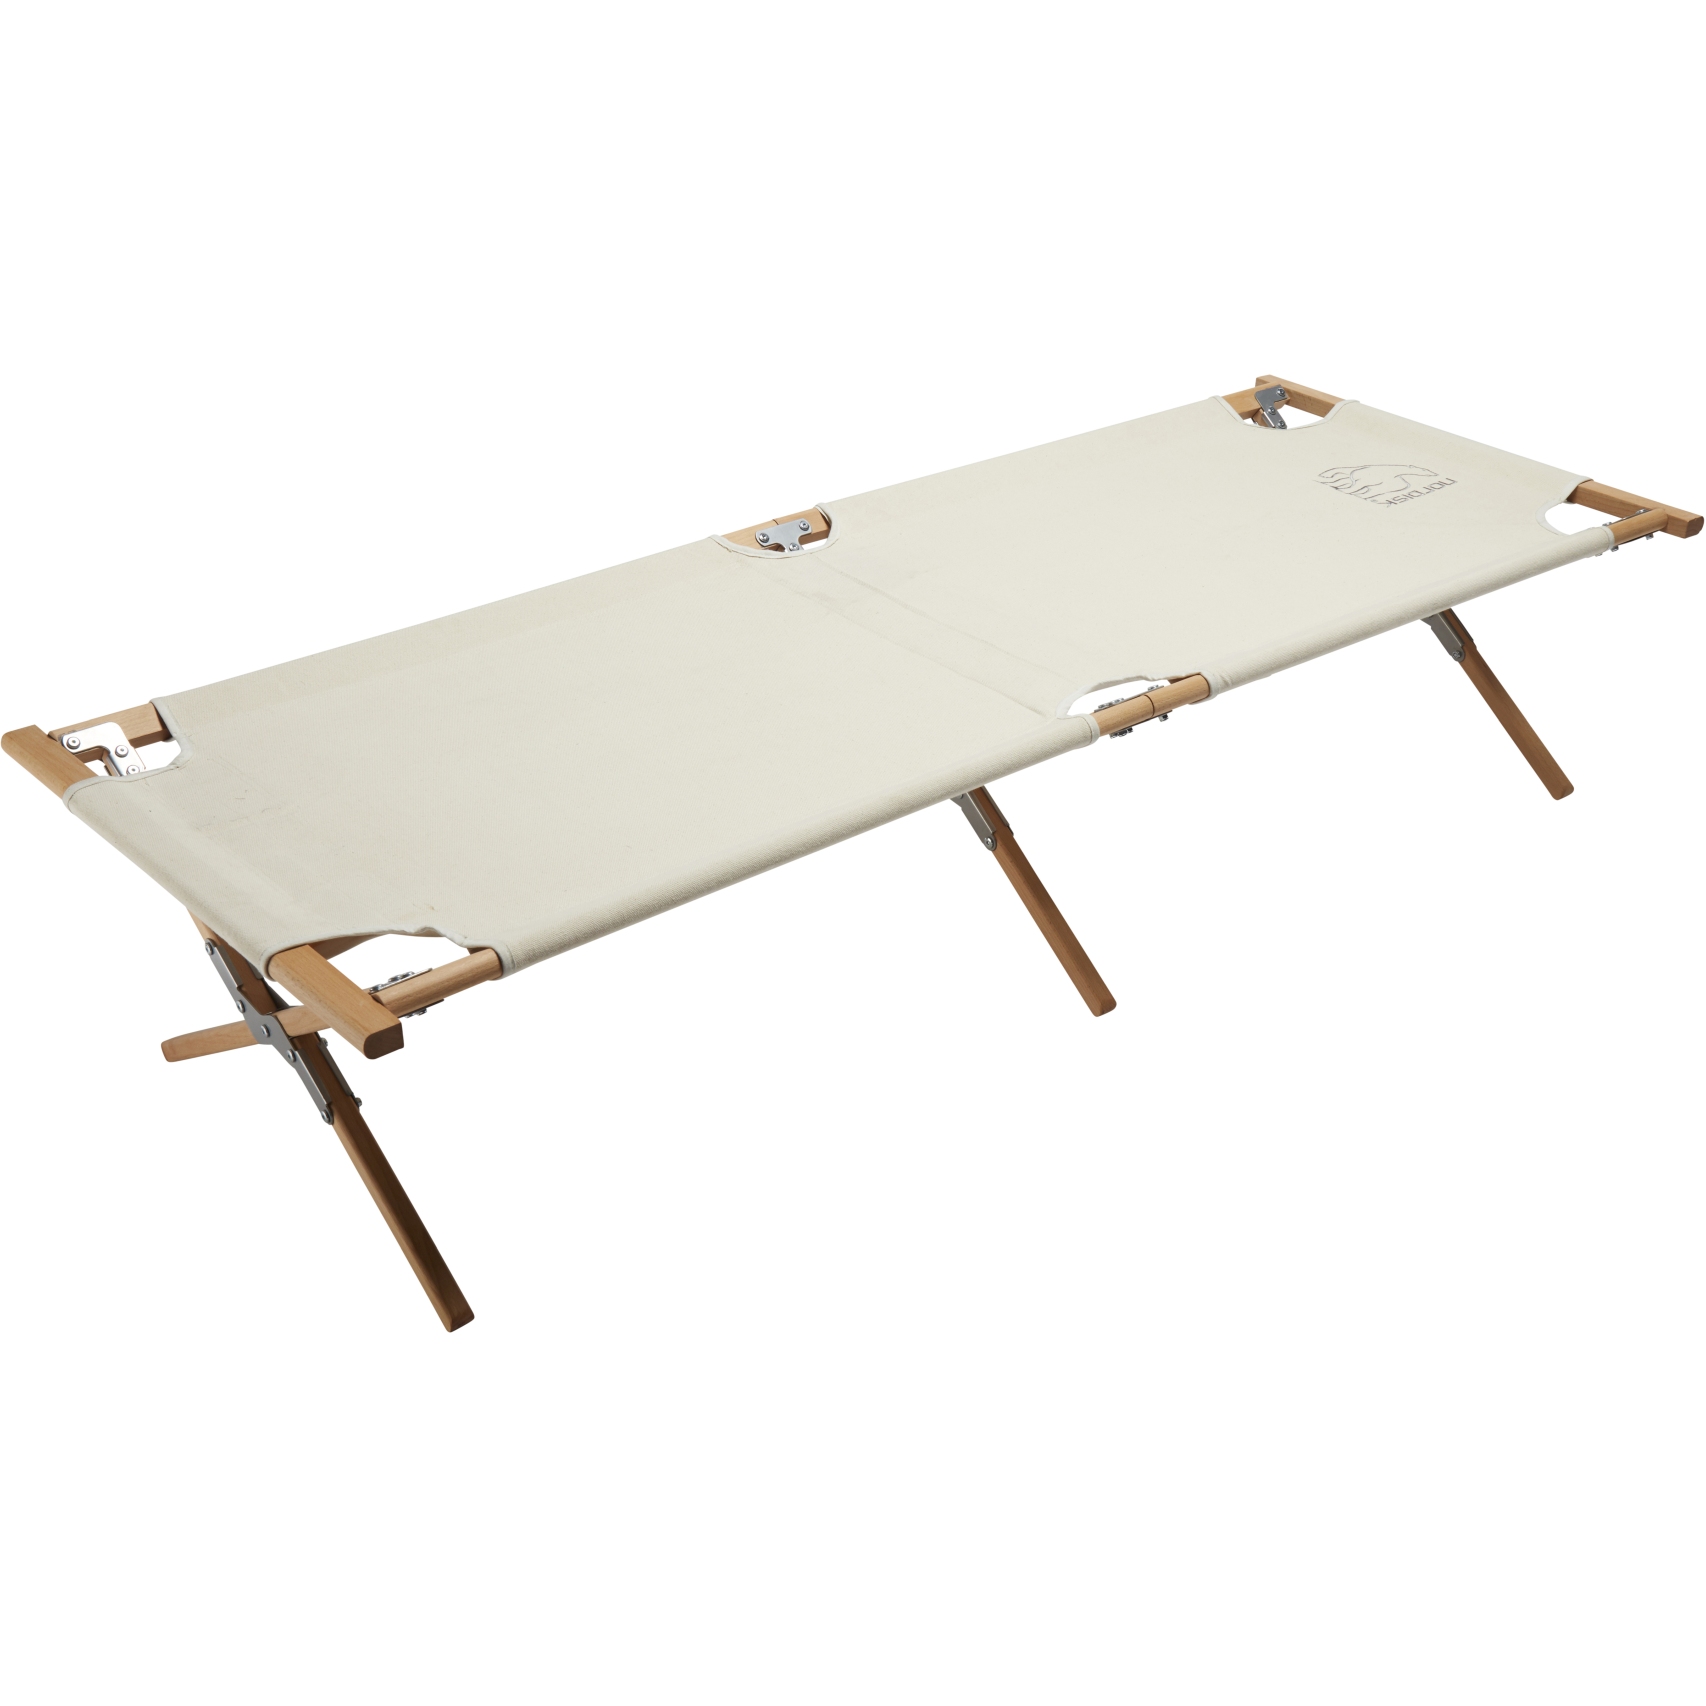 Picture of Nordisk Rold Wooden Field Bed - Natural